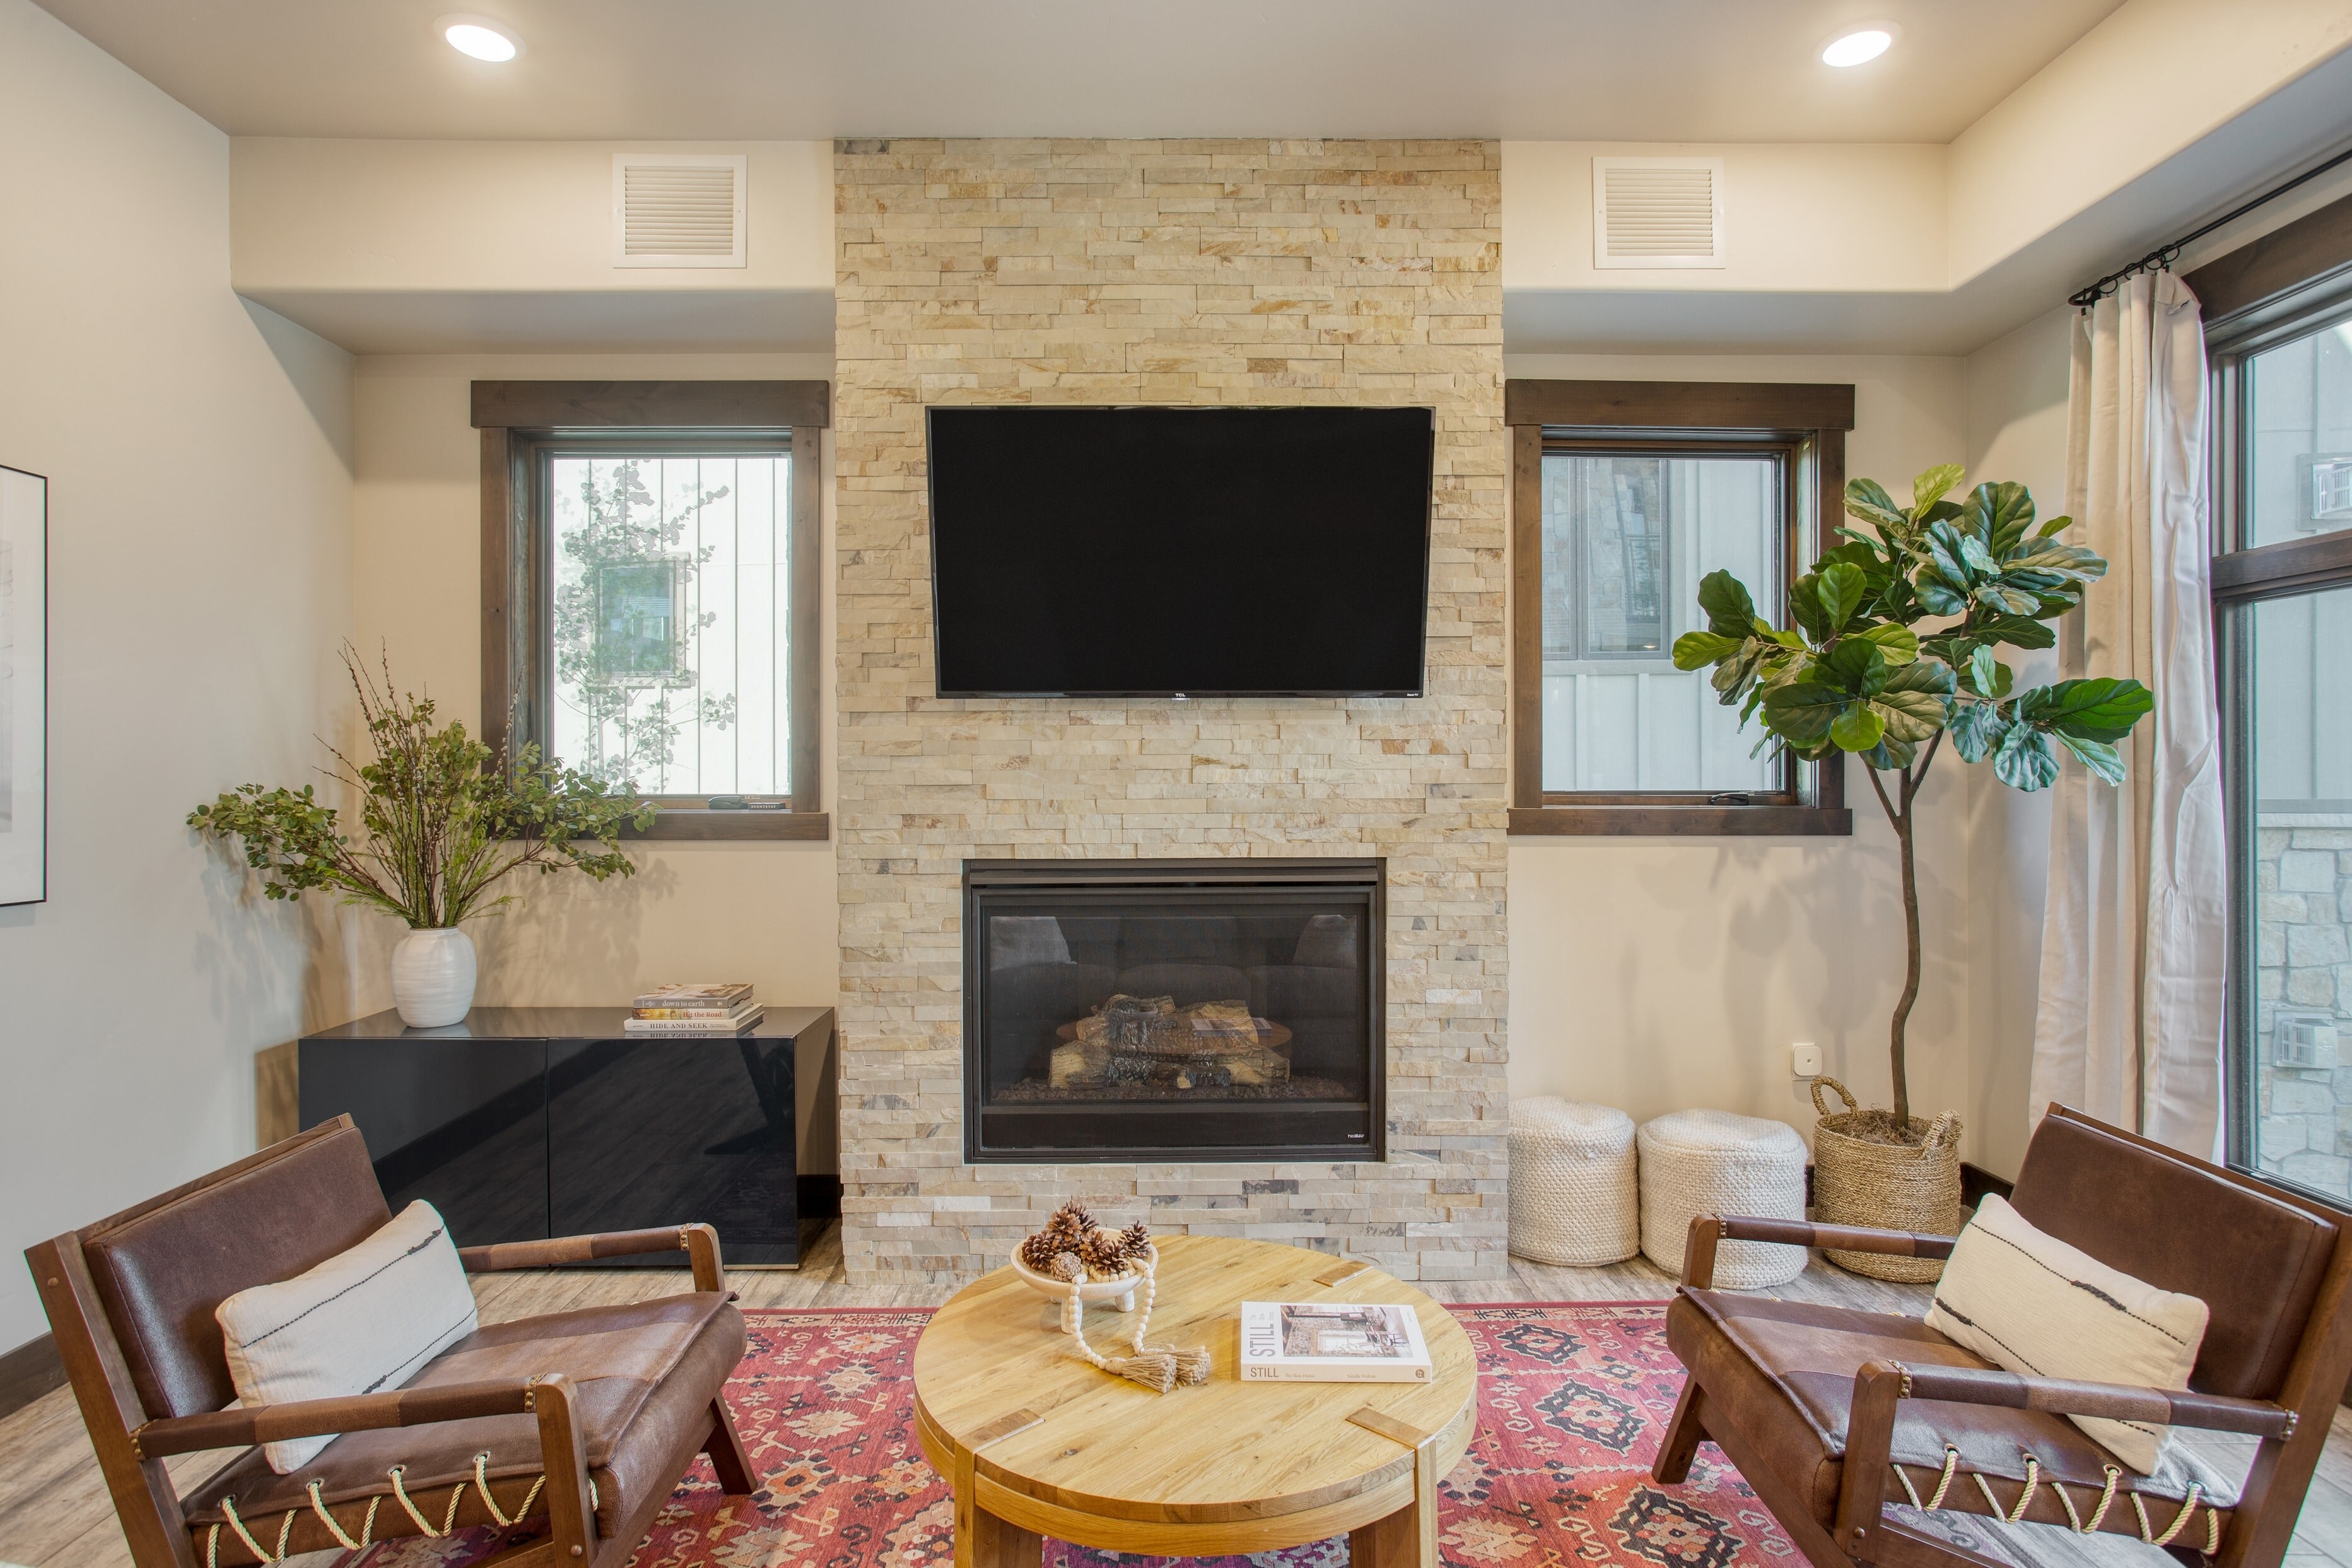 Living room features a fireplace and TV.